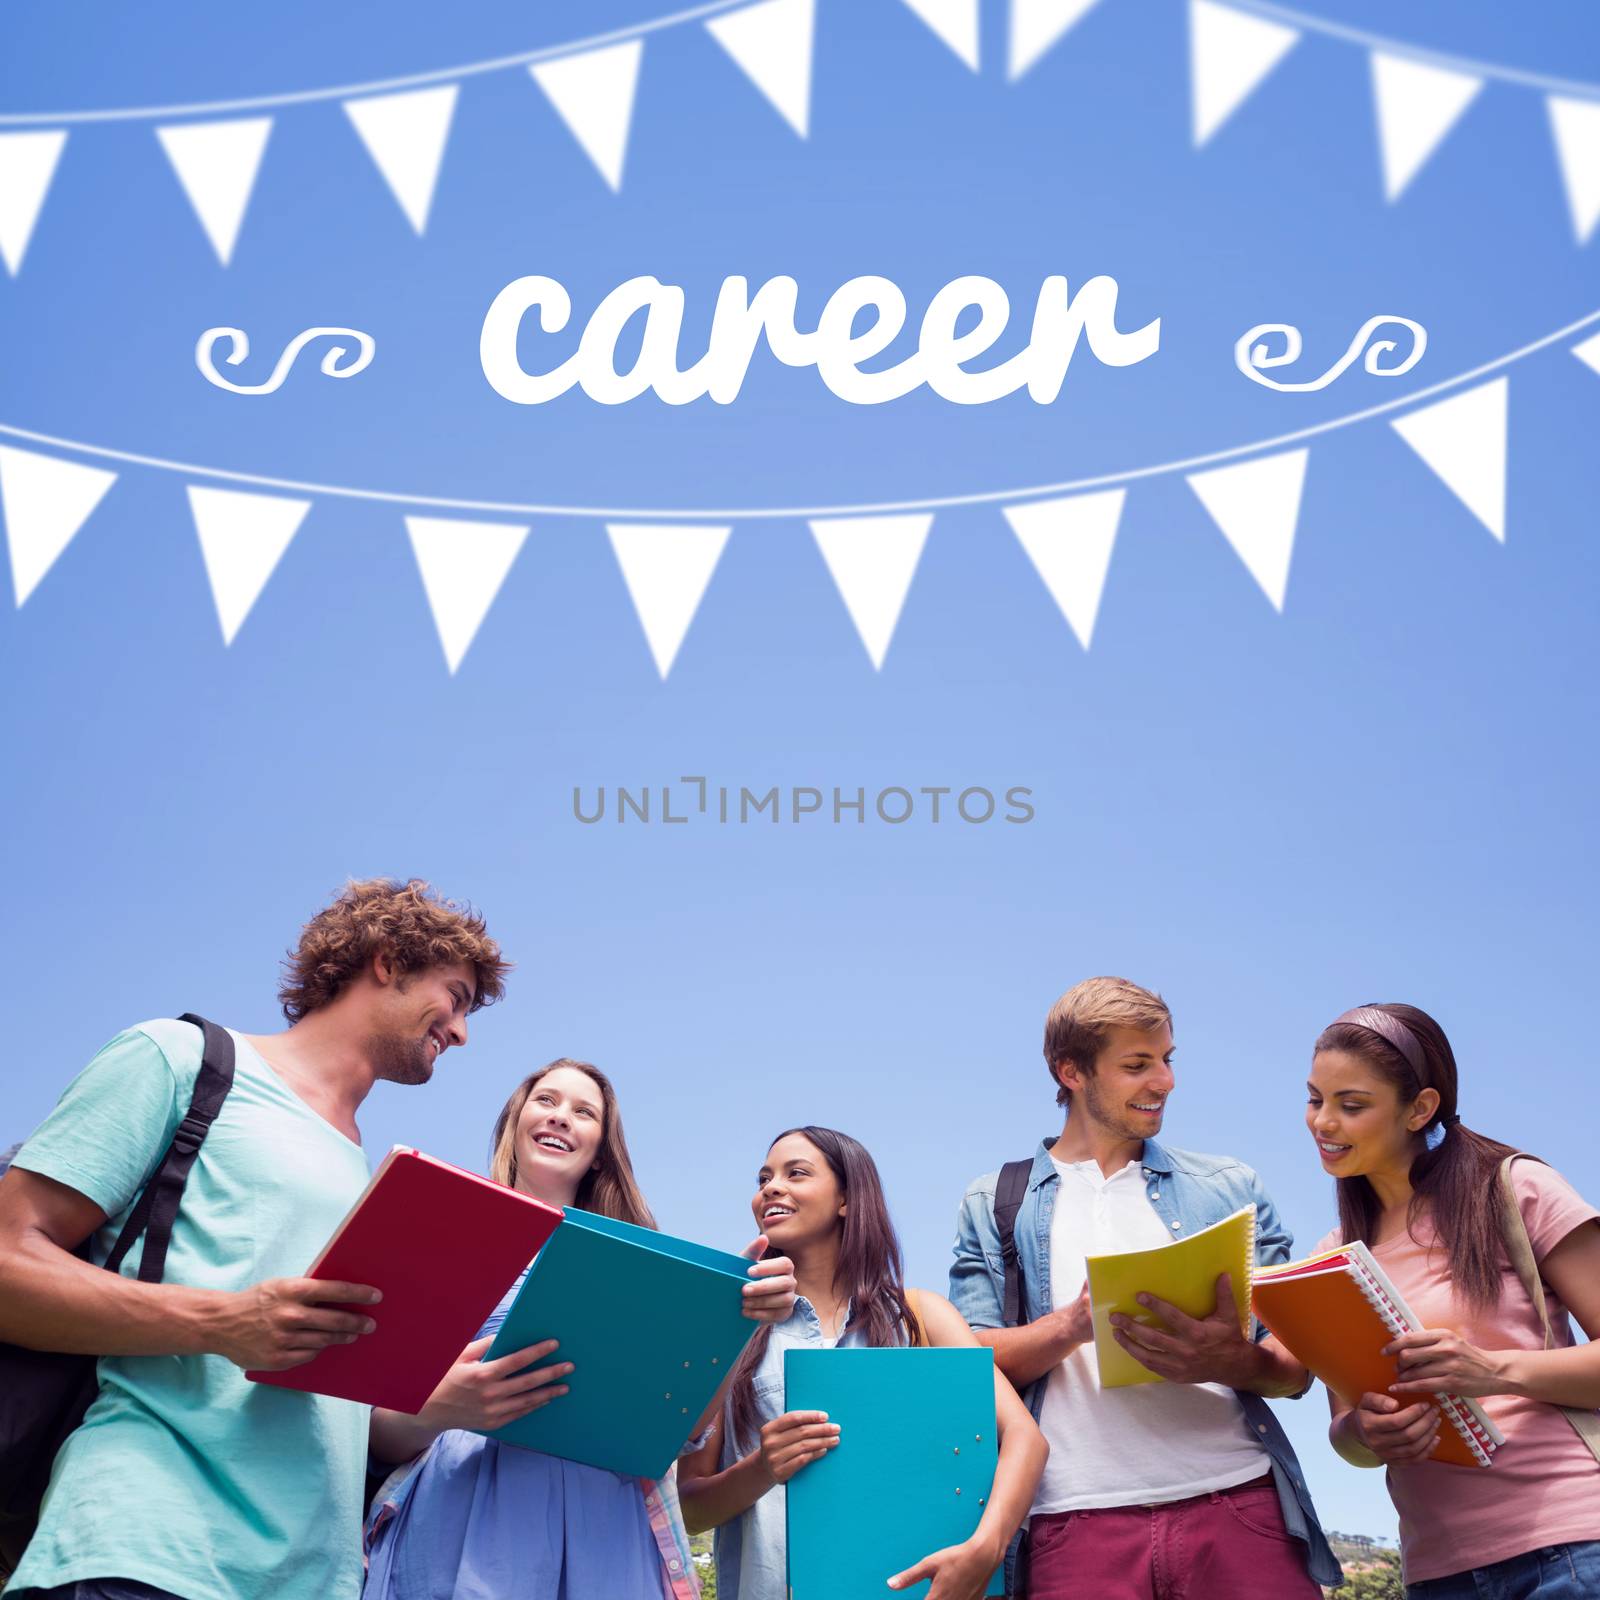 The word career and bunting against students standing and chatting together 